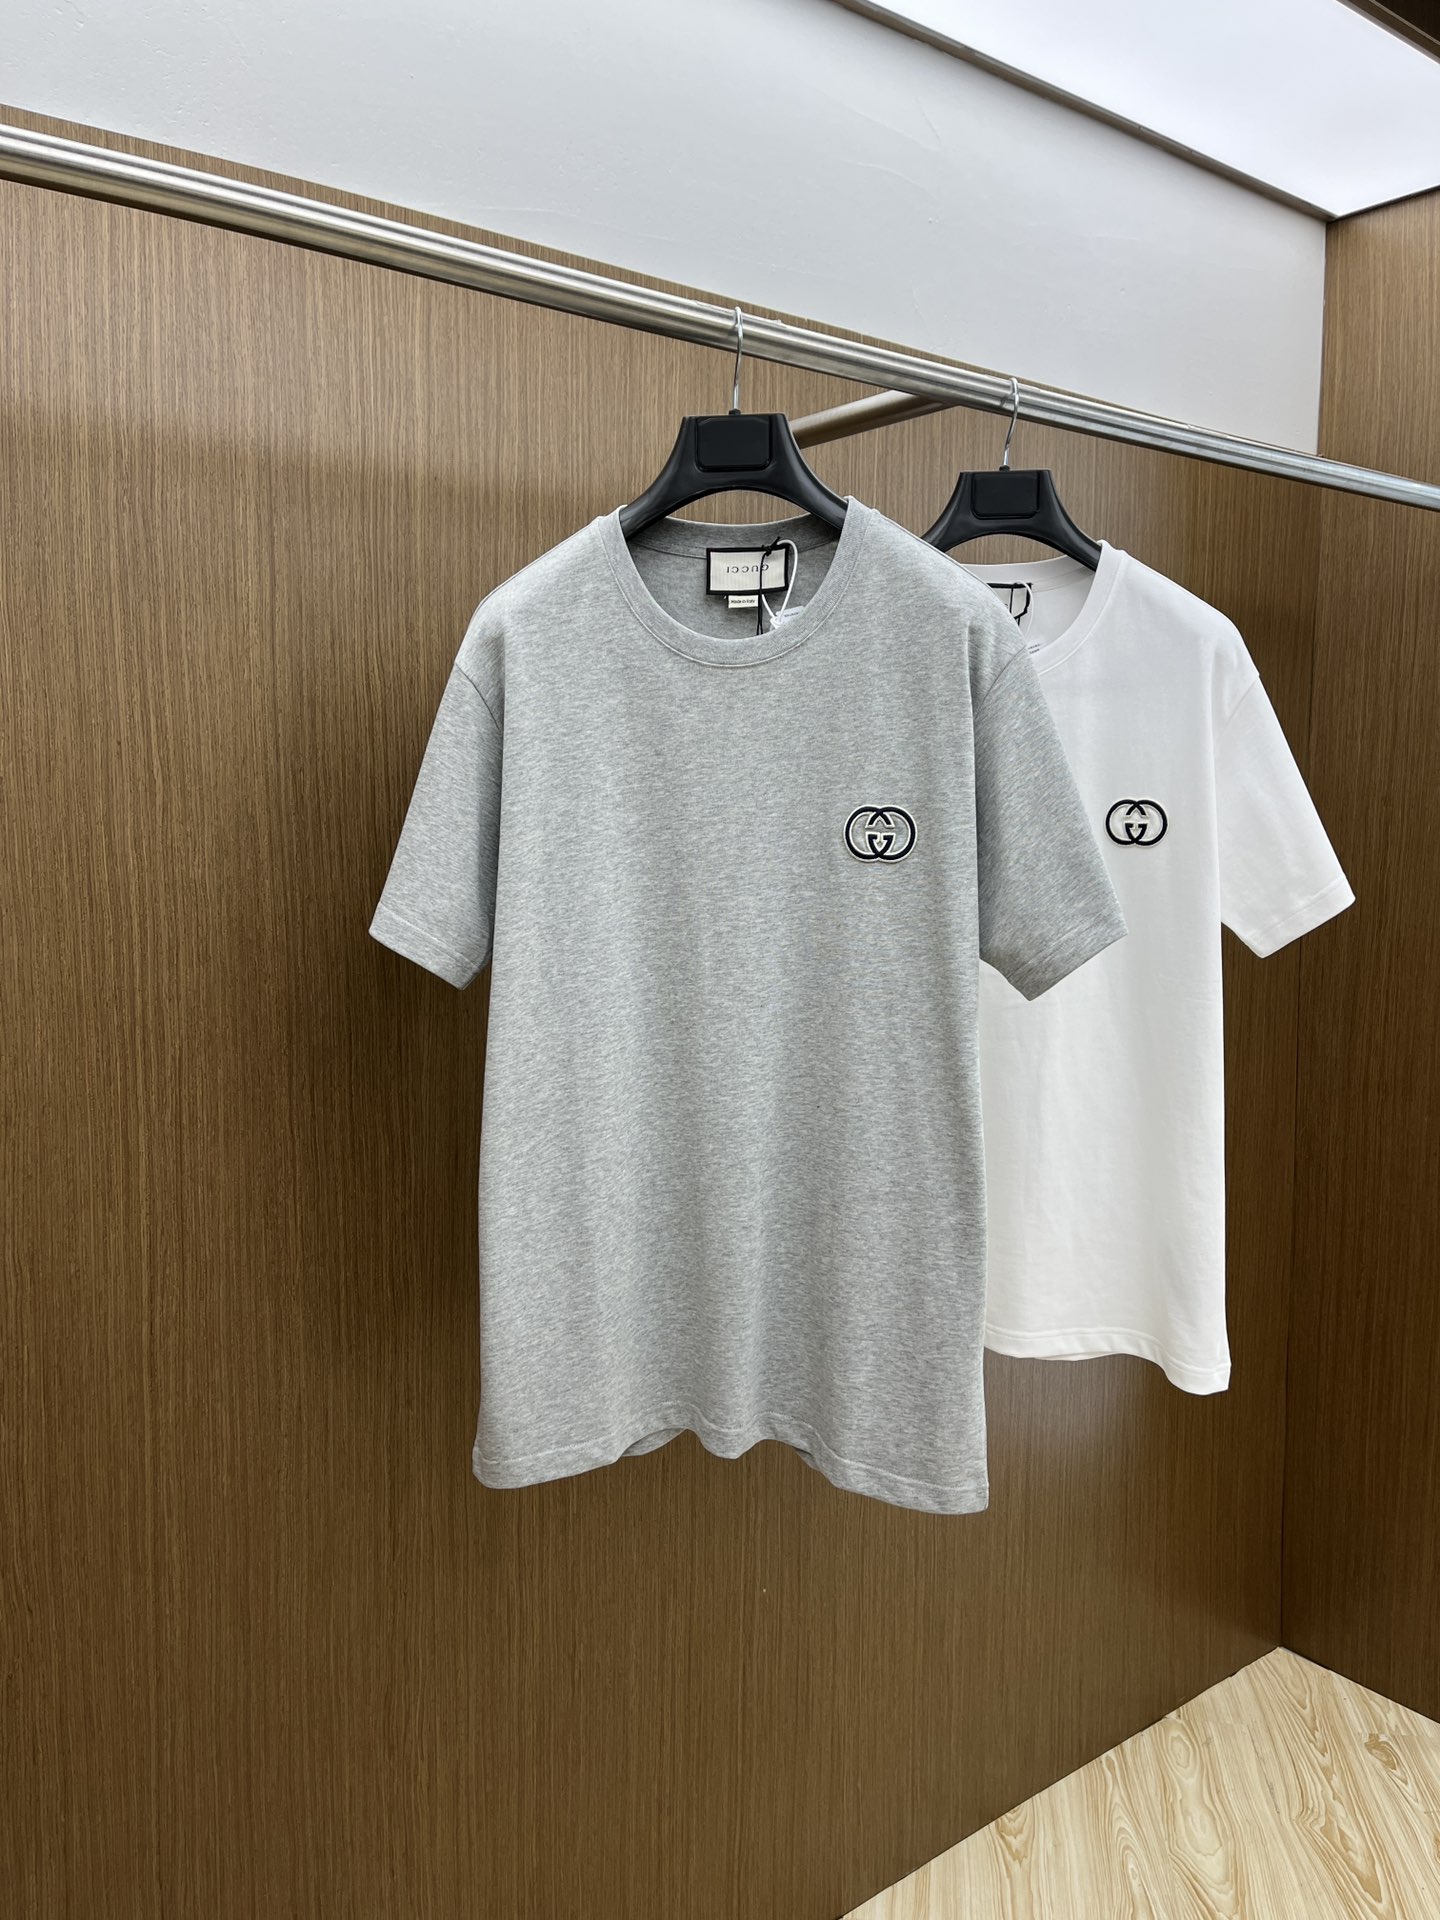 Online China
 Gucci Clothing T-Shirt Black Grey White Embroidery Cotton Spring/Summer Collection Fashion Casual